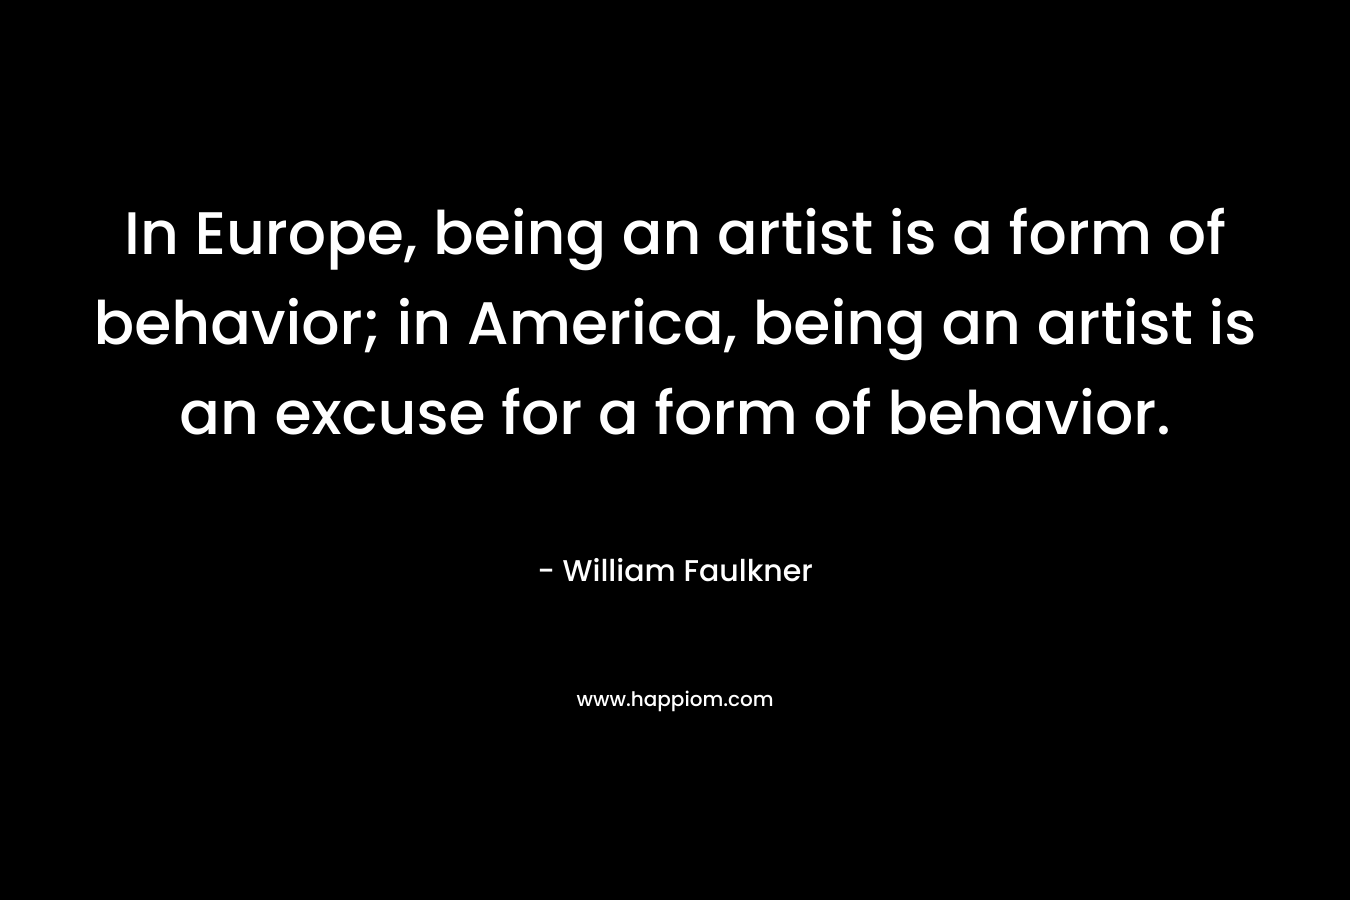 In Europe, being an artist is a form of behavior; in America, being an artist is an excuse for a form of behavior. – William Faulkner